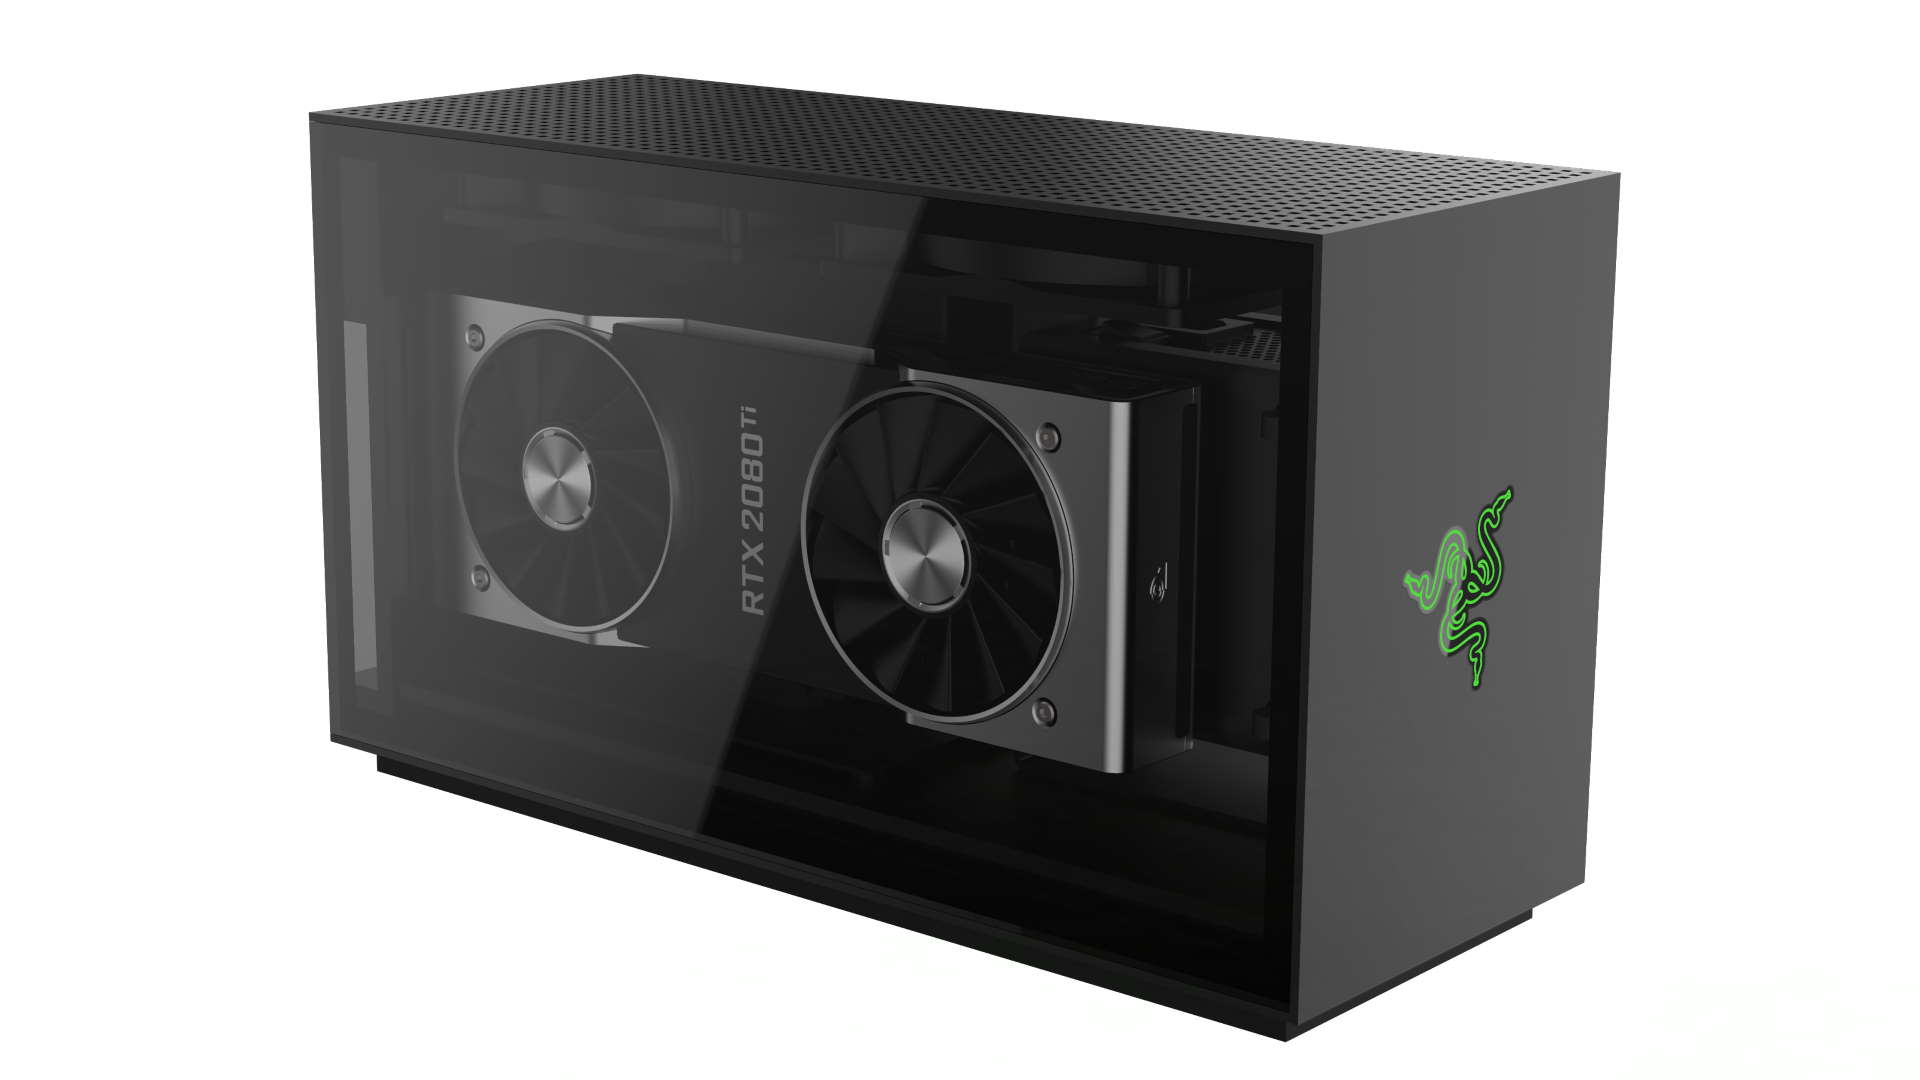 Razer’s Tomahawk gaming PC looks like Intel wanted to help build an